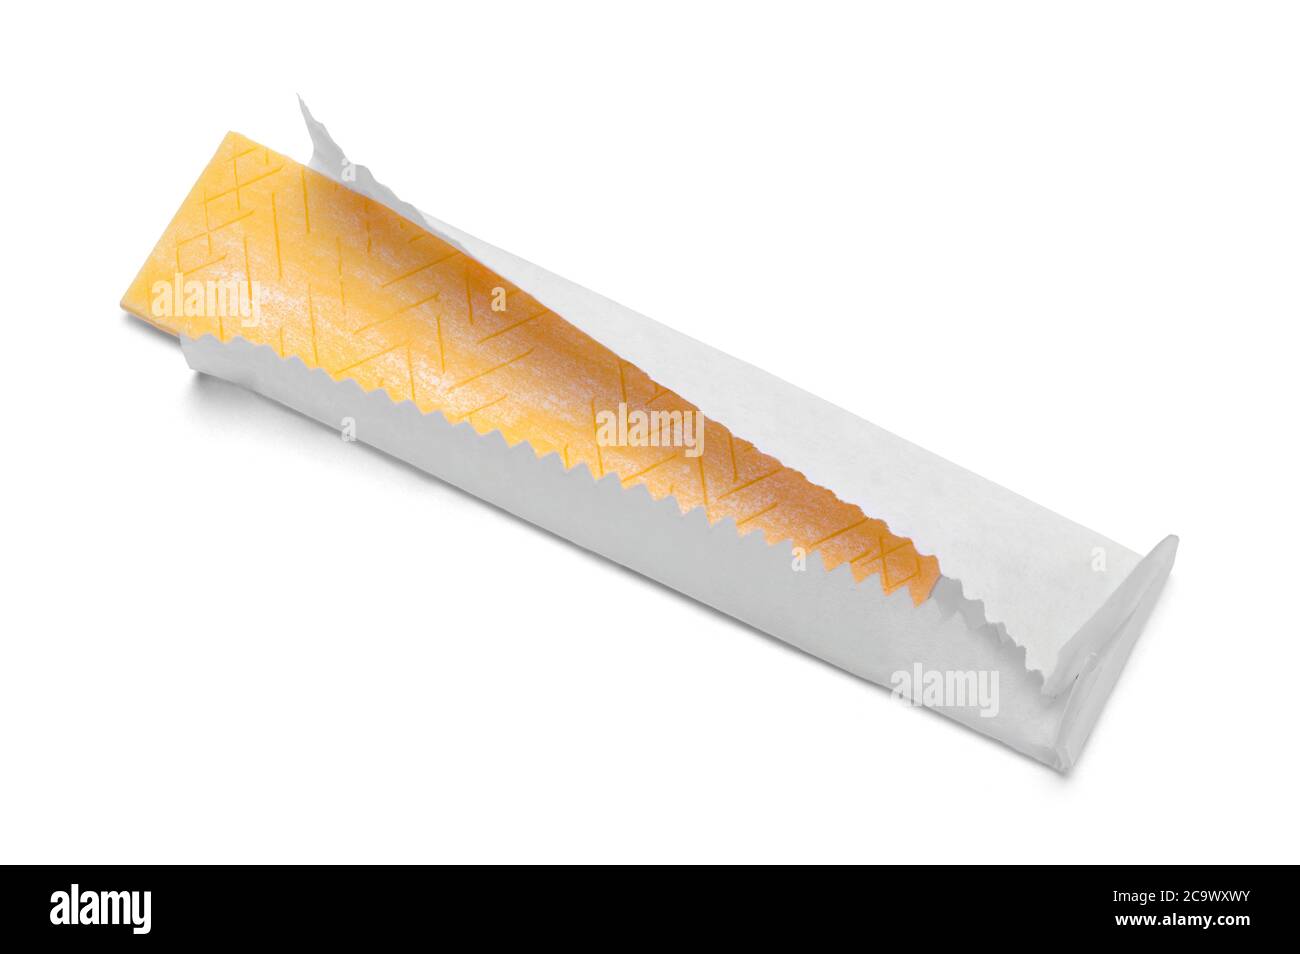 Yellow Stick of Gum in Paper Wrapper Isolated on White. Stock Photo